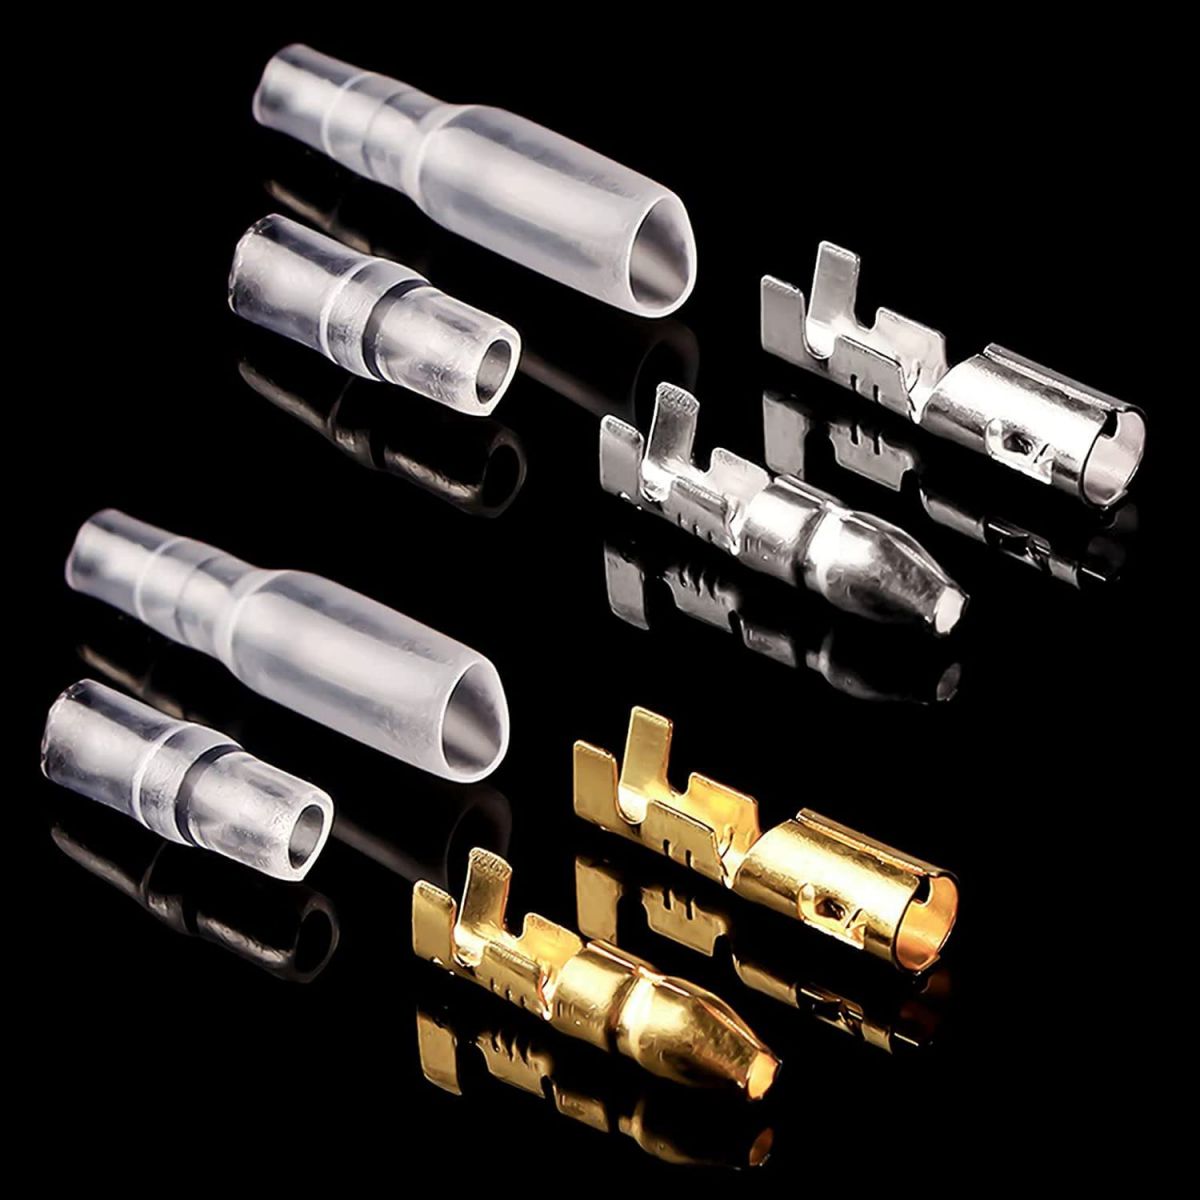 Set of round connectors for wires